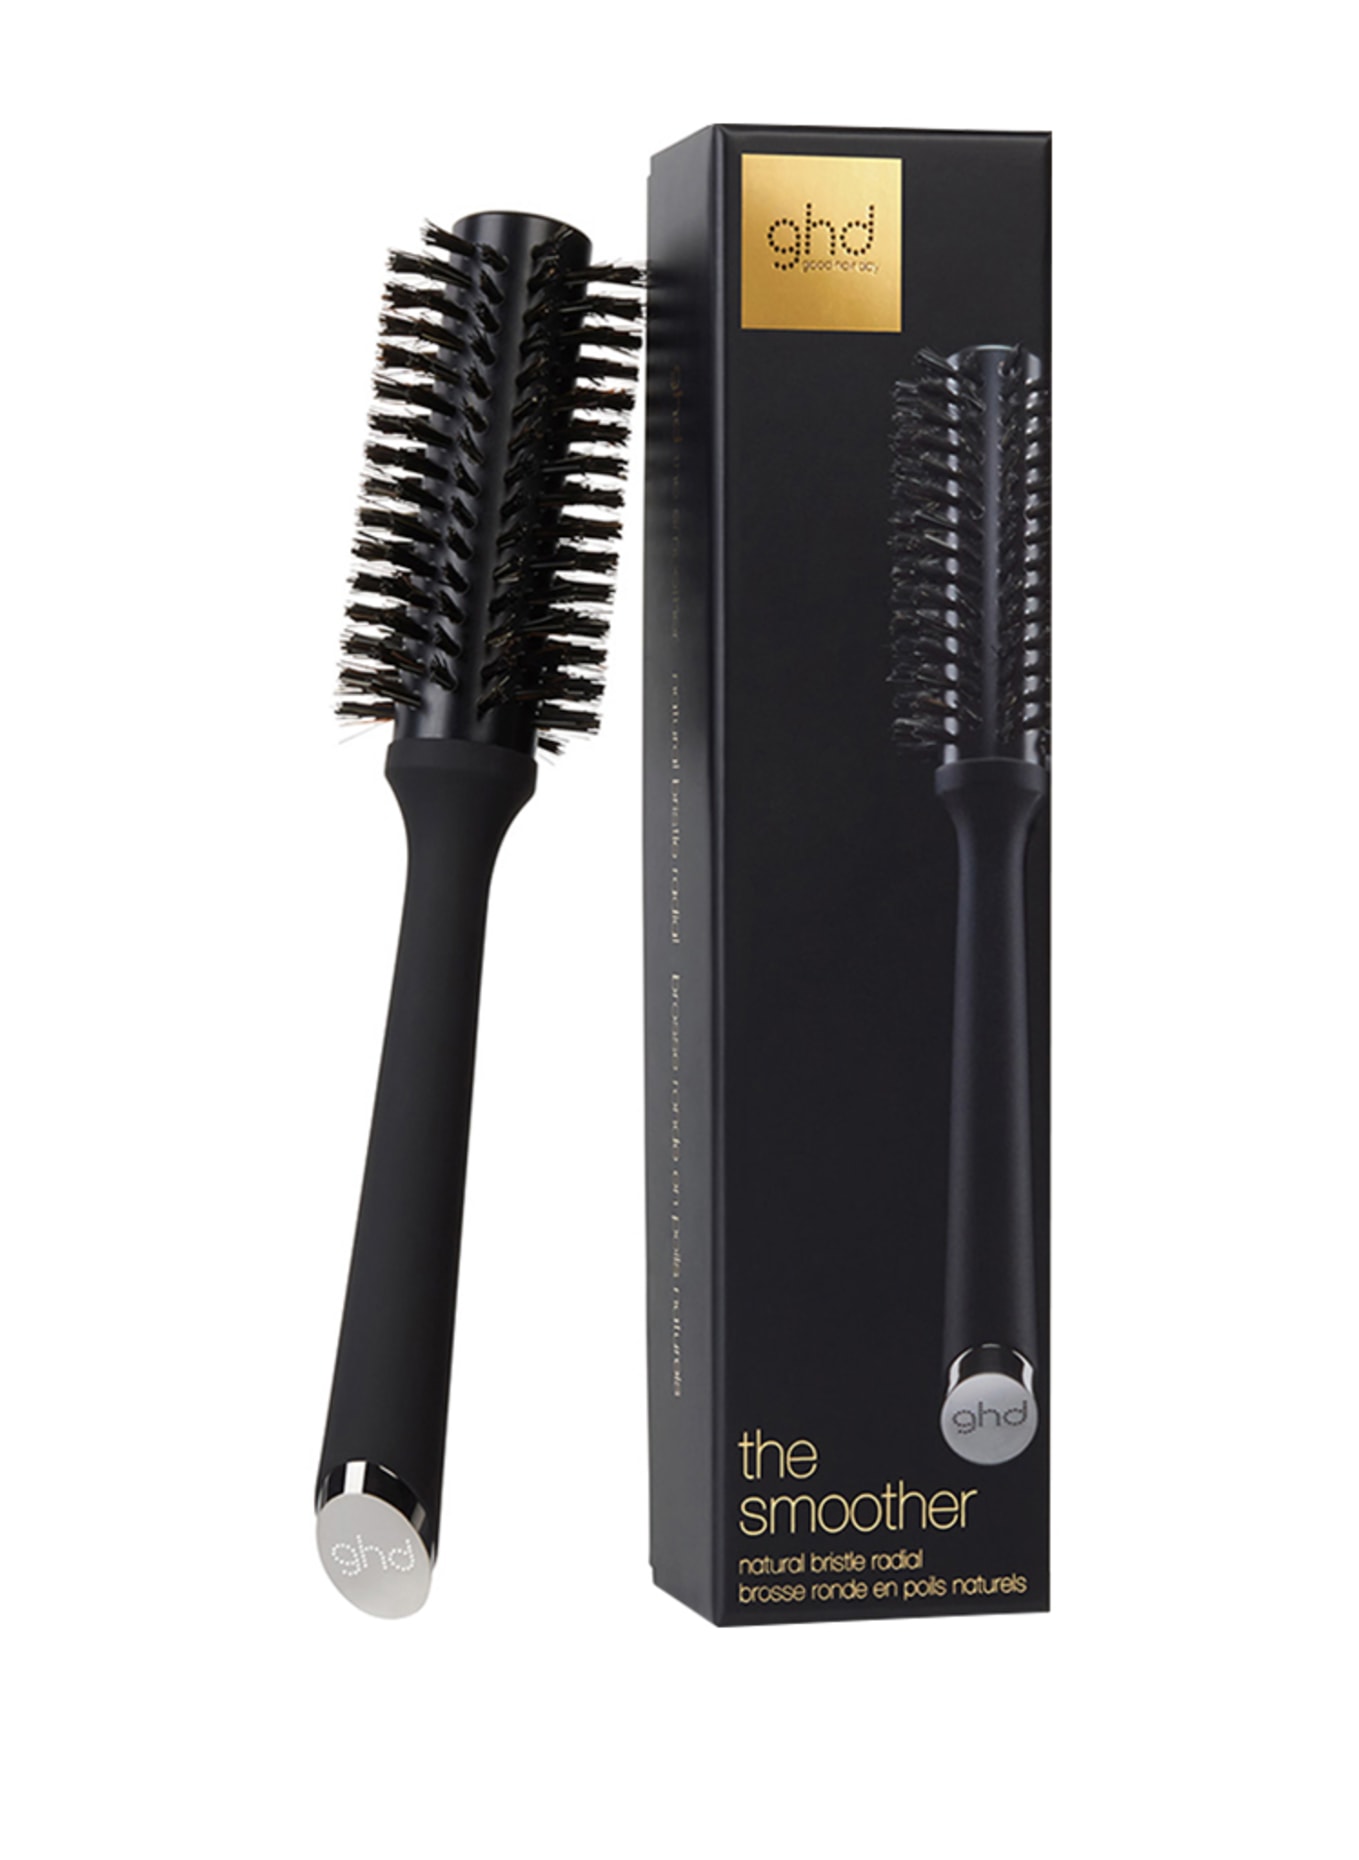 ghd THE SMOOTHER (SIZE 2) (Bild 2)